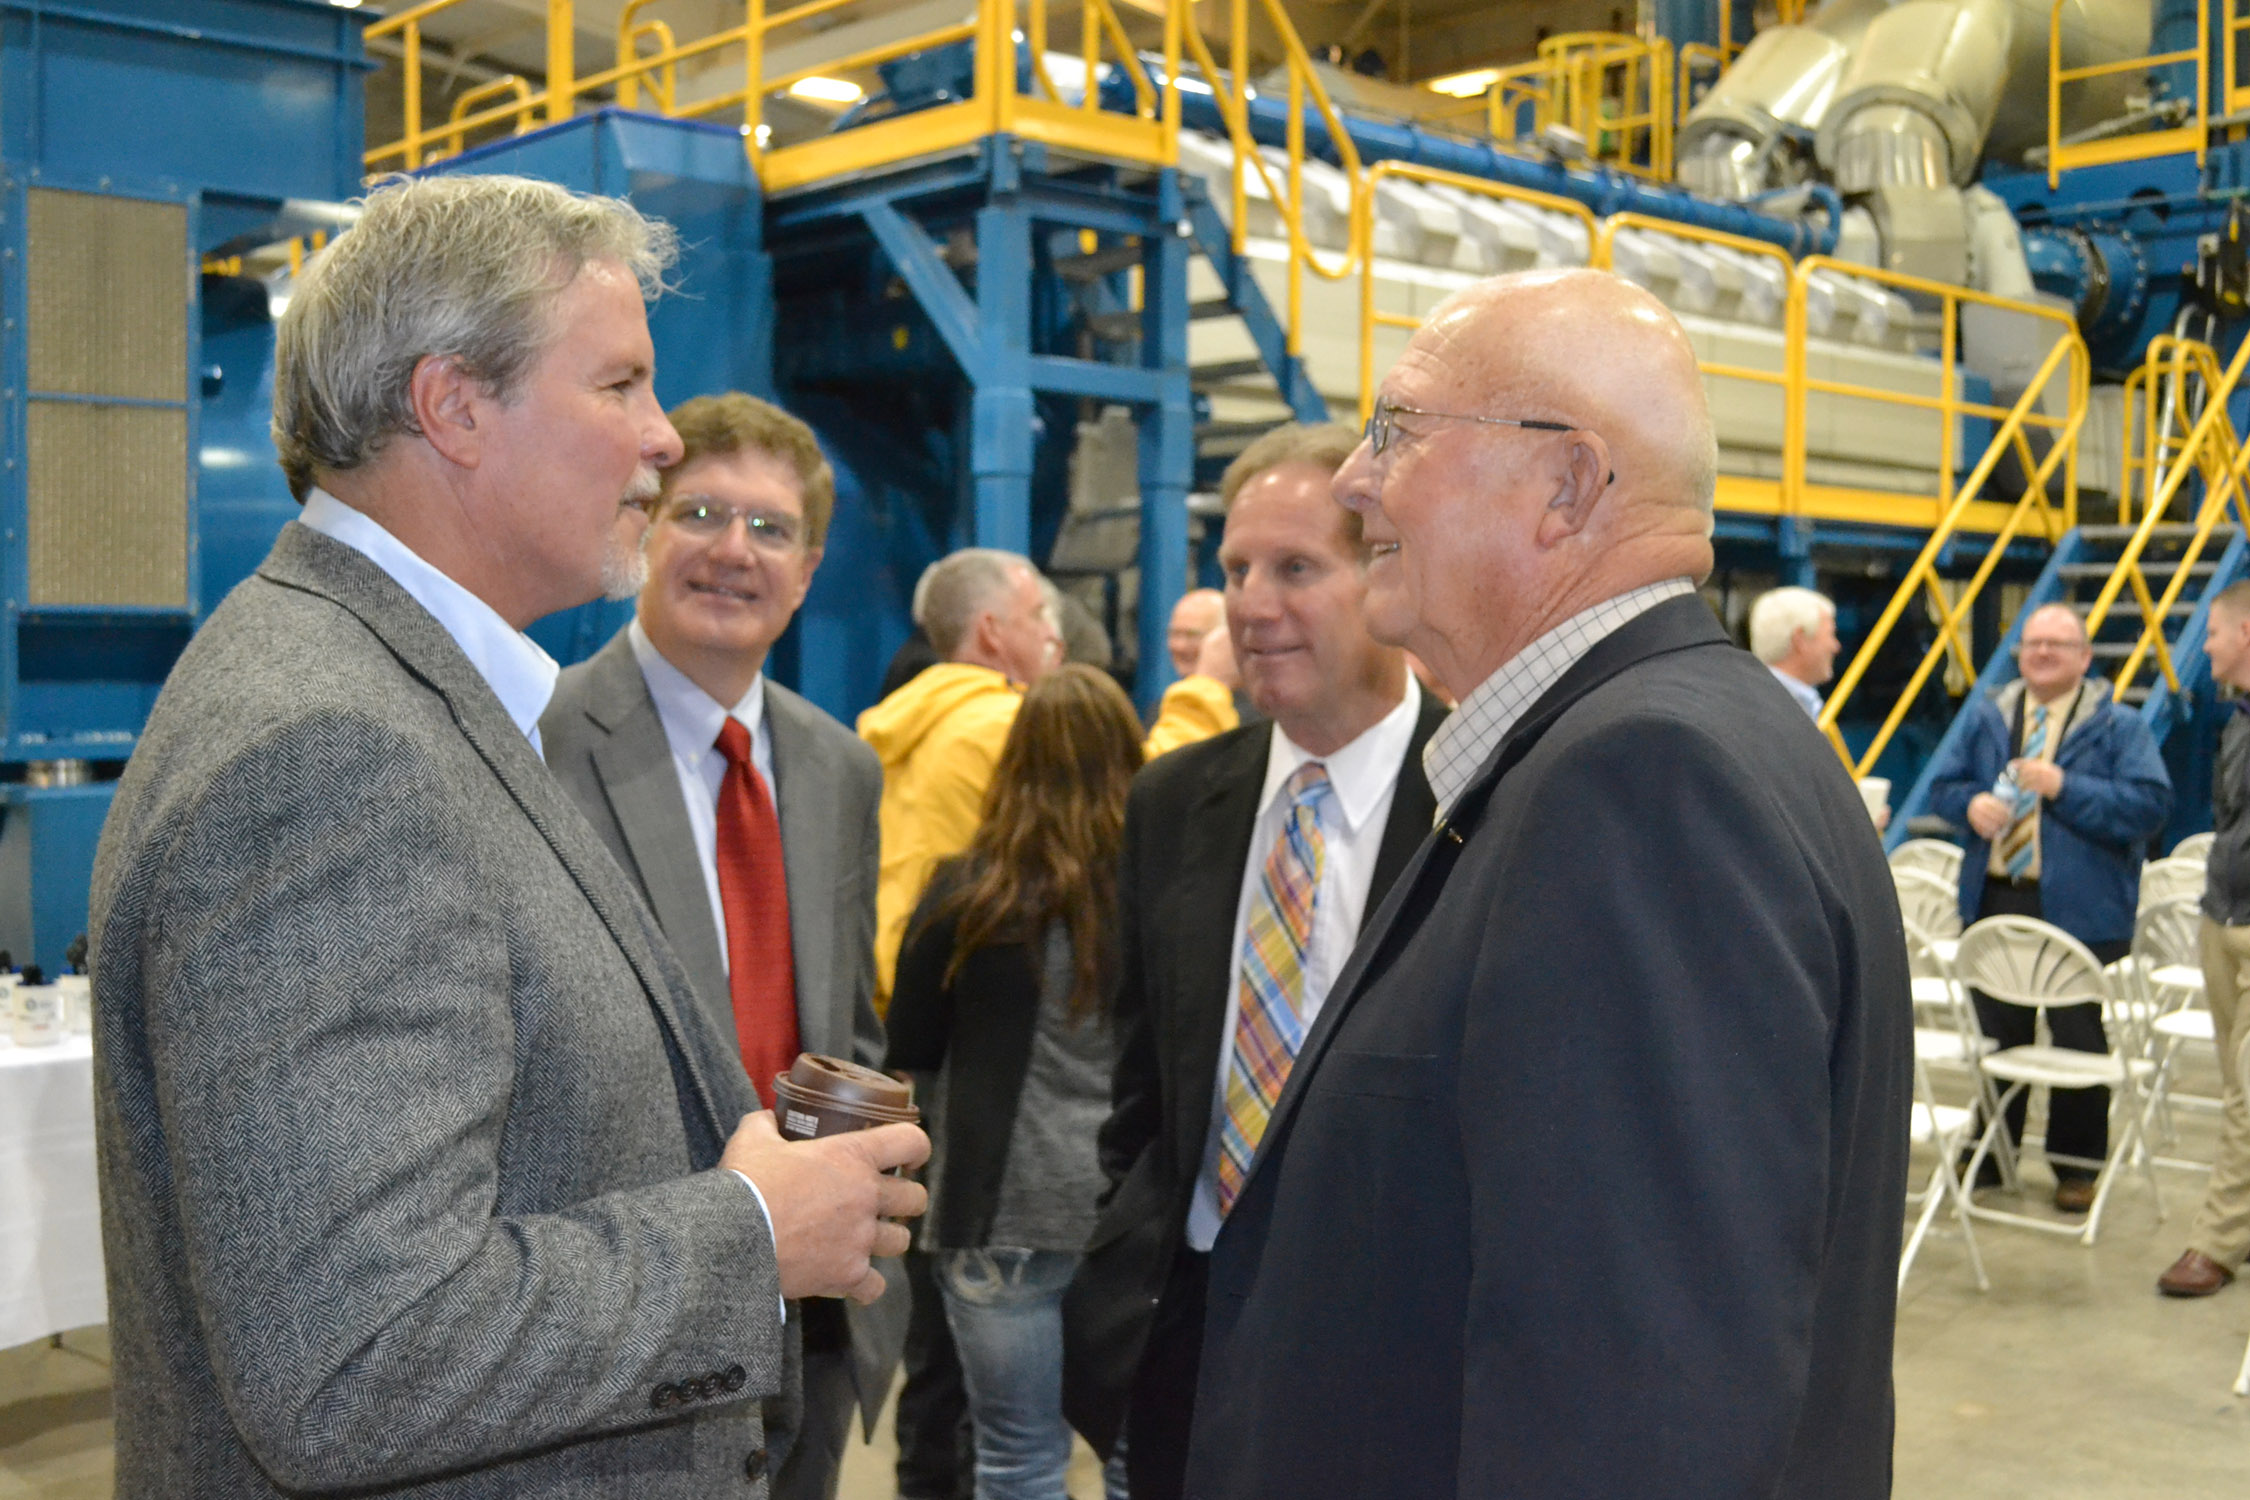 (L to R foreground) Gary Moss, member of Midwest Energy's Board of Directors, talks with Senator Ralph Ostmeyer (R-Grinnell) at the Goodman Energy Center dedication, while Bill Dowling, Midwest Energy's VP for Engineering and Energy Supply, and Rep. Rick Billinger (R-Goodland) listen.